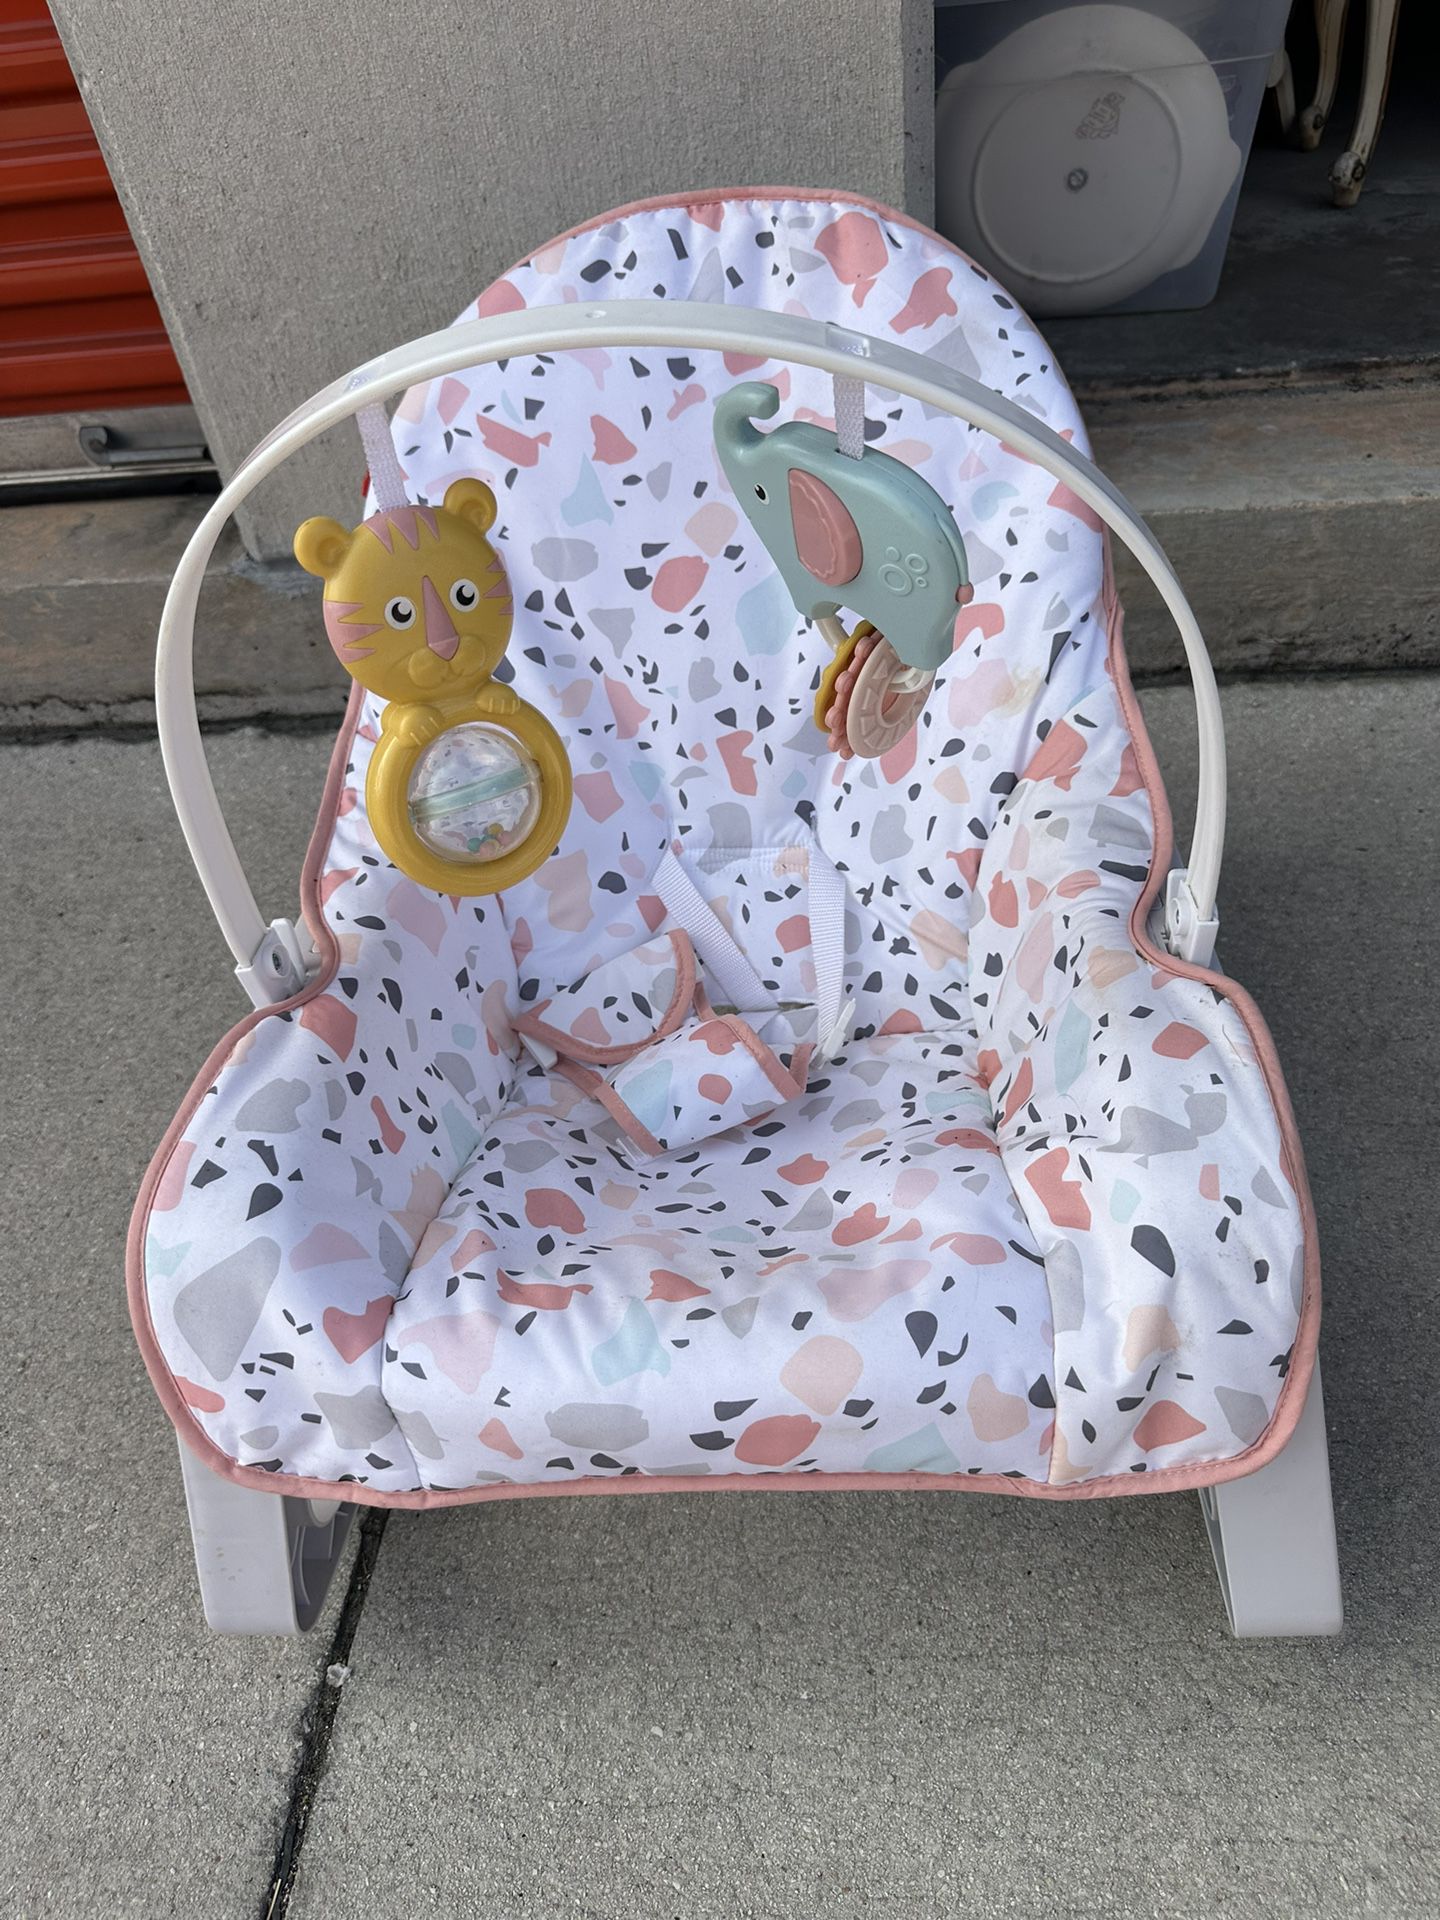 Fisher-Price Patterned Rocker With Hanging Toys